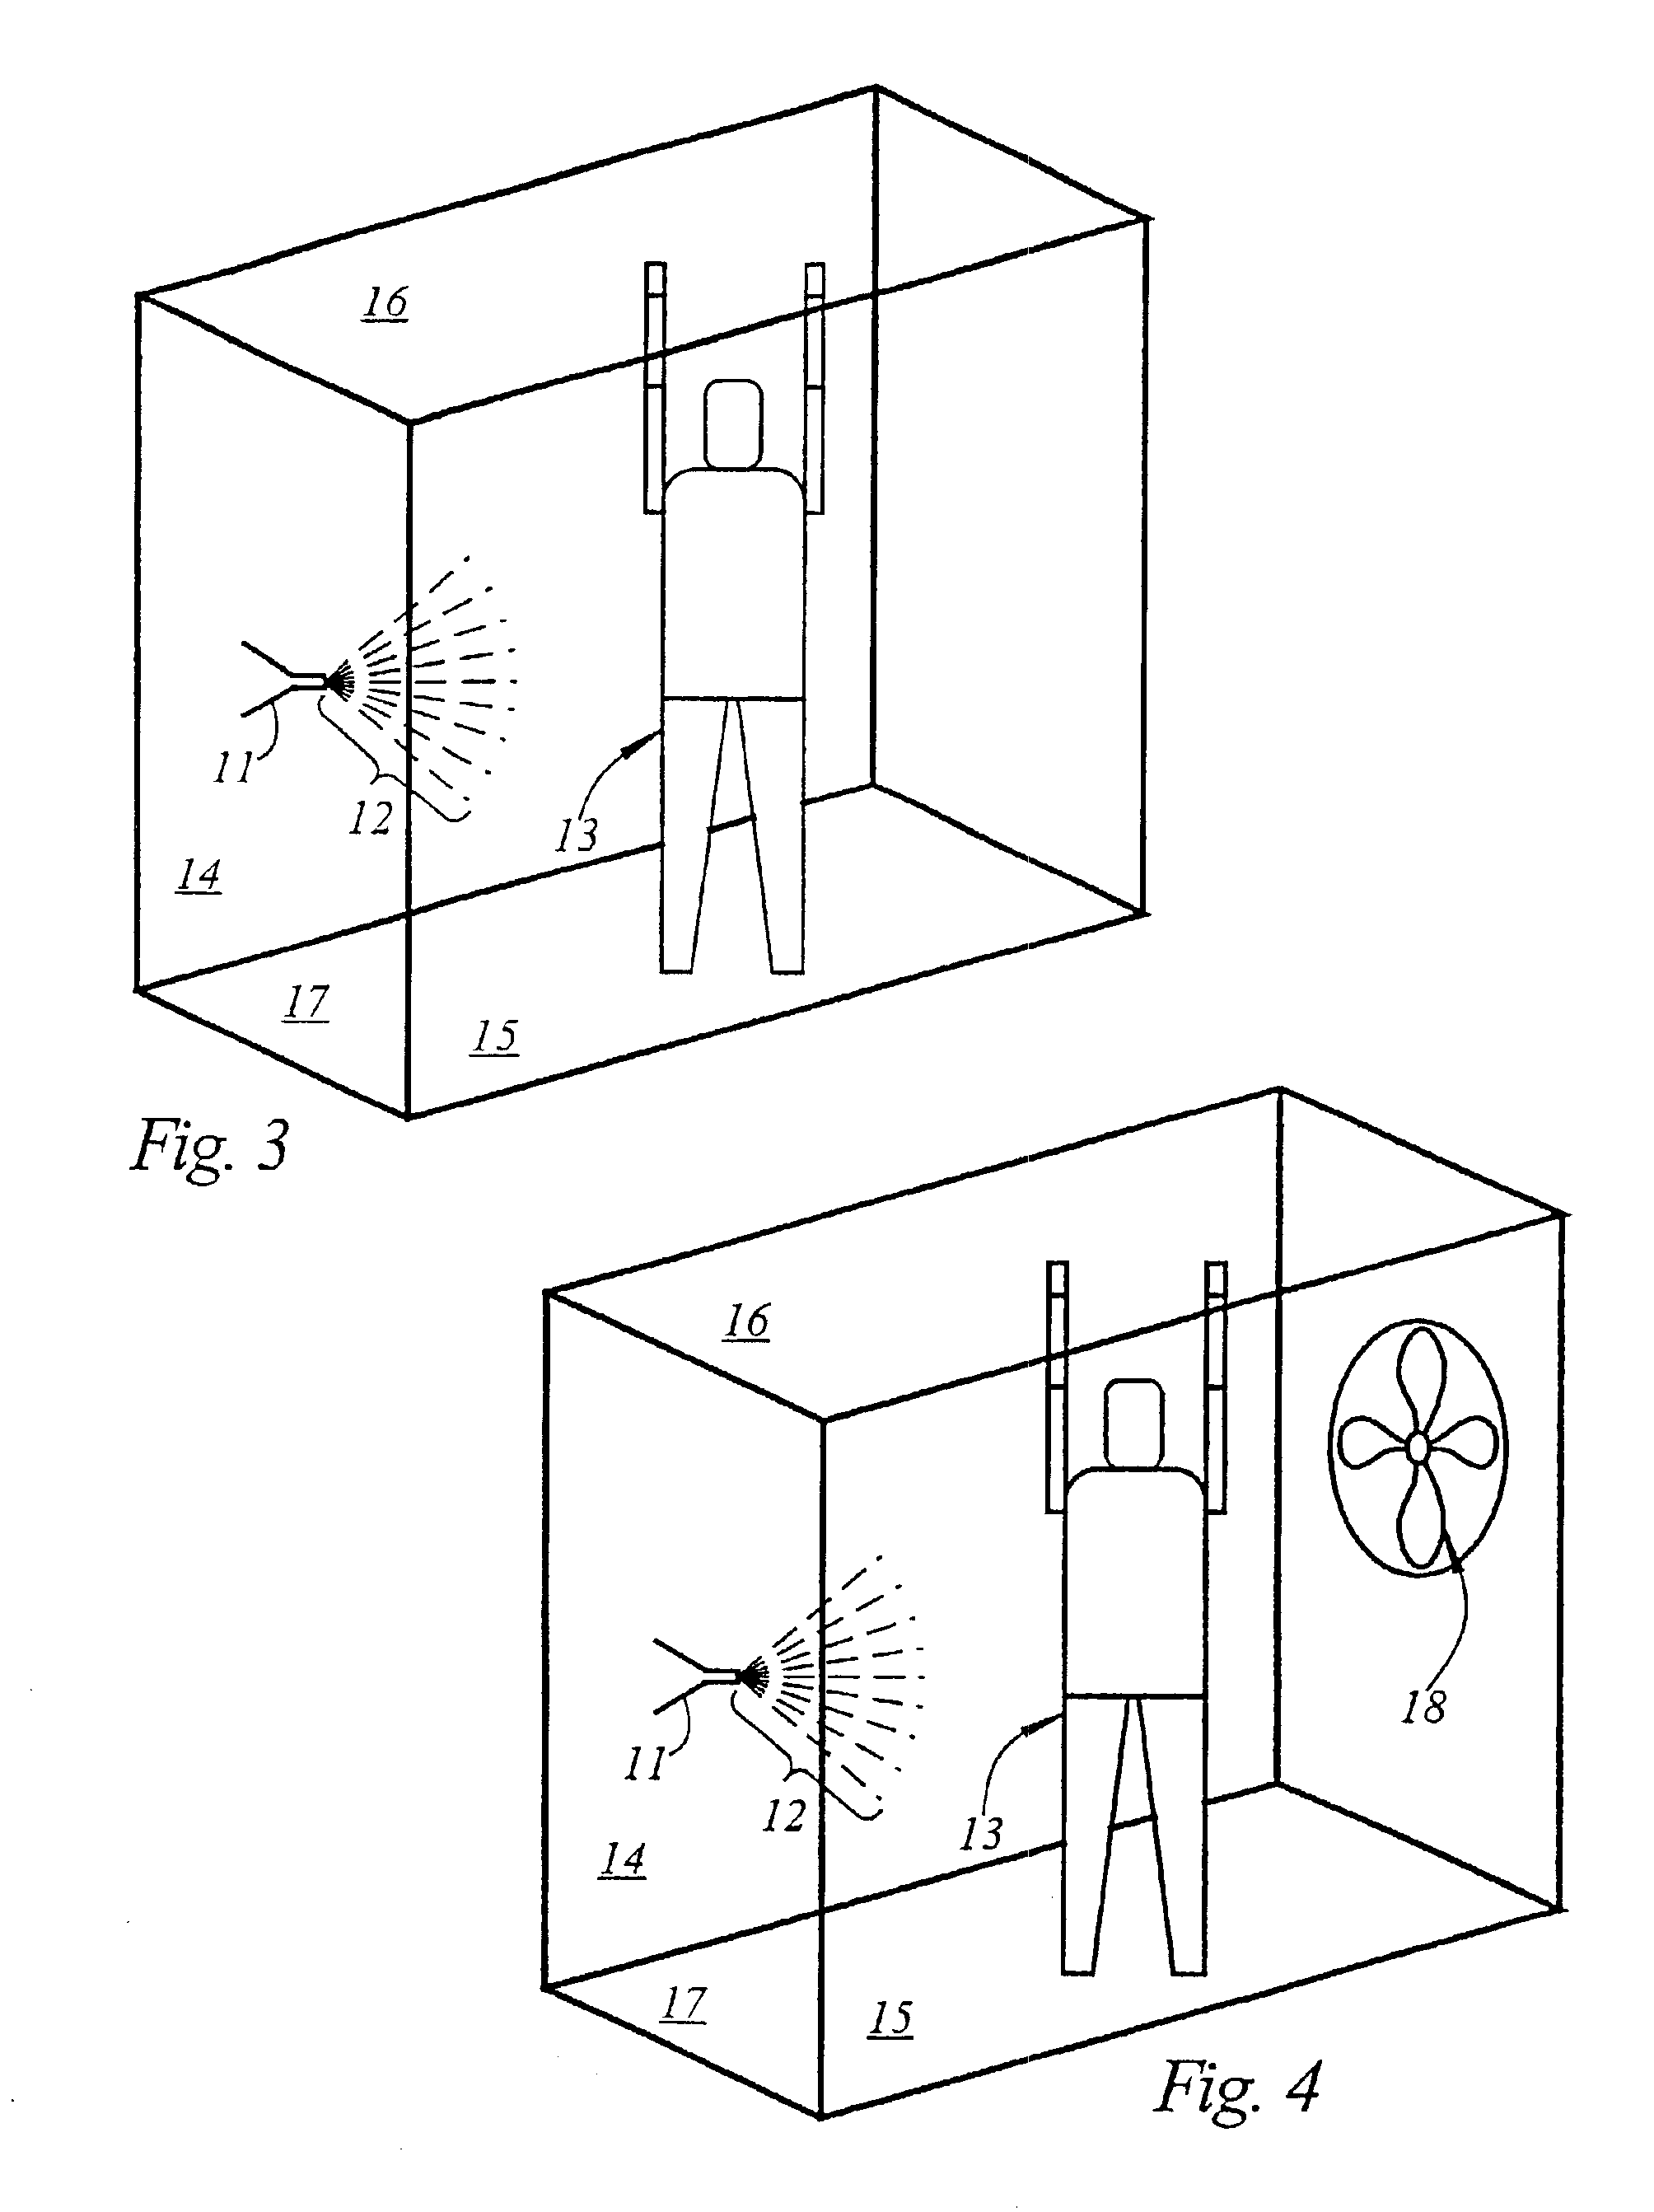 Method of and apparatus for automatically coating the human body